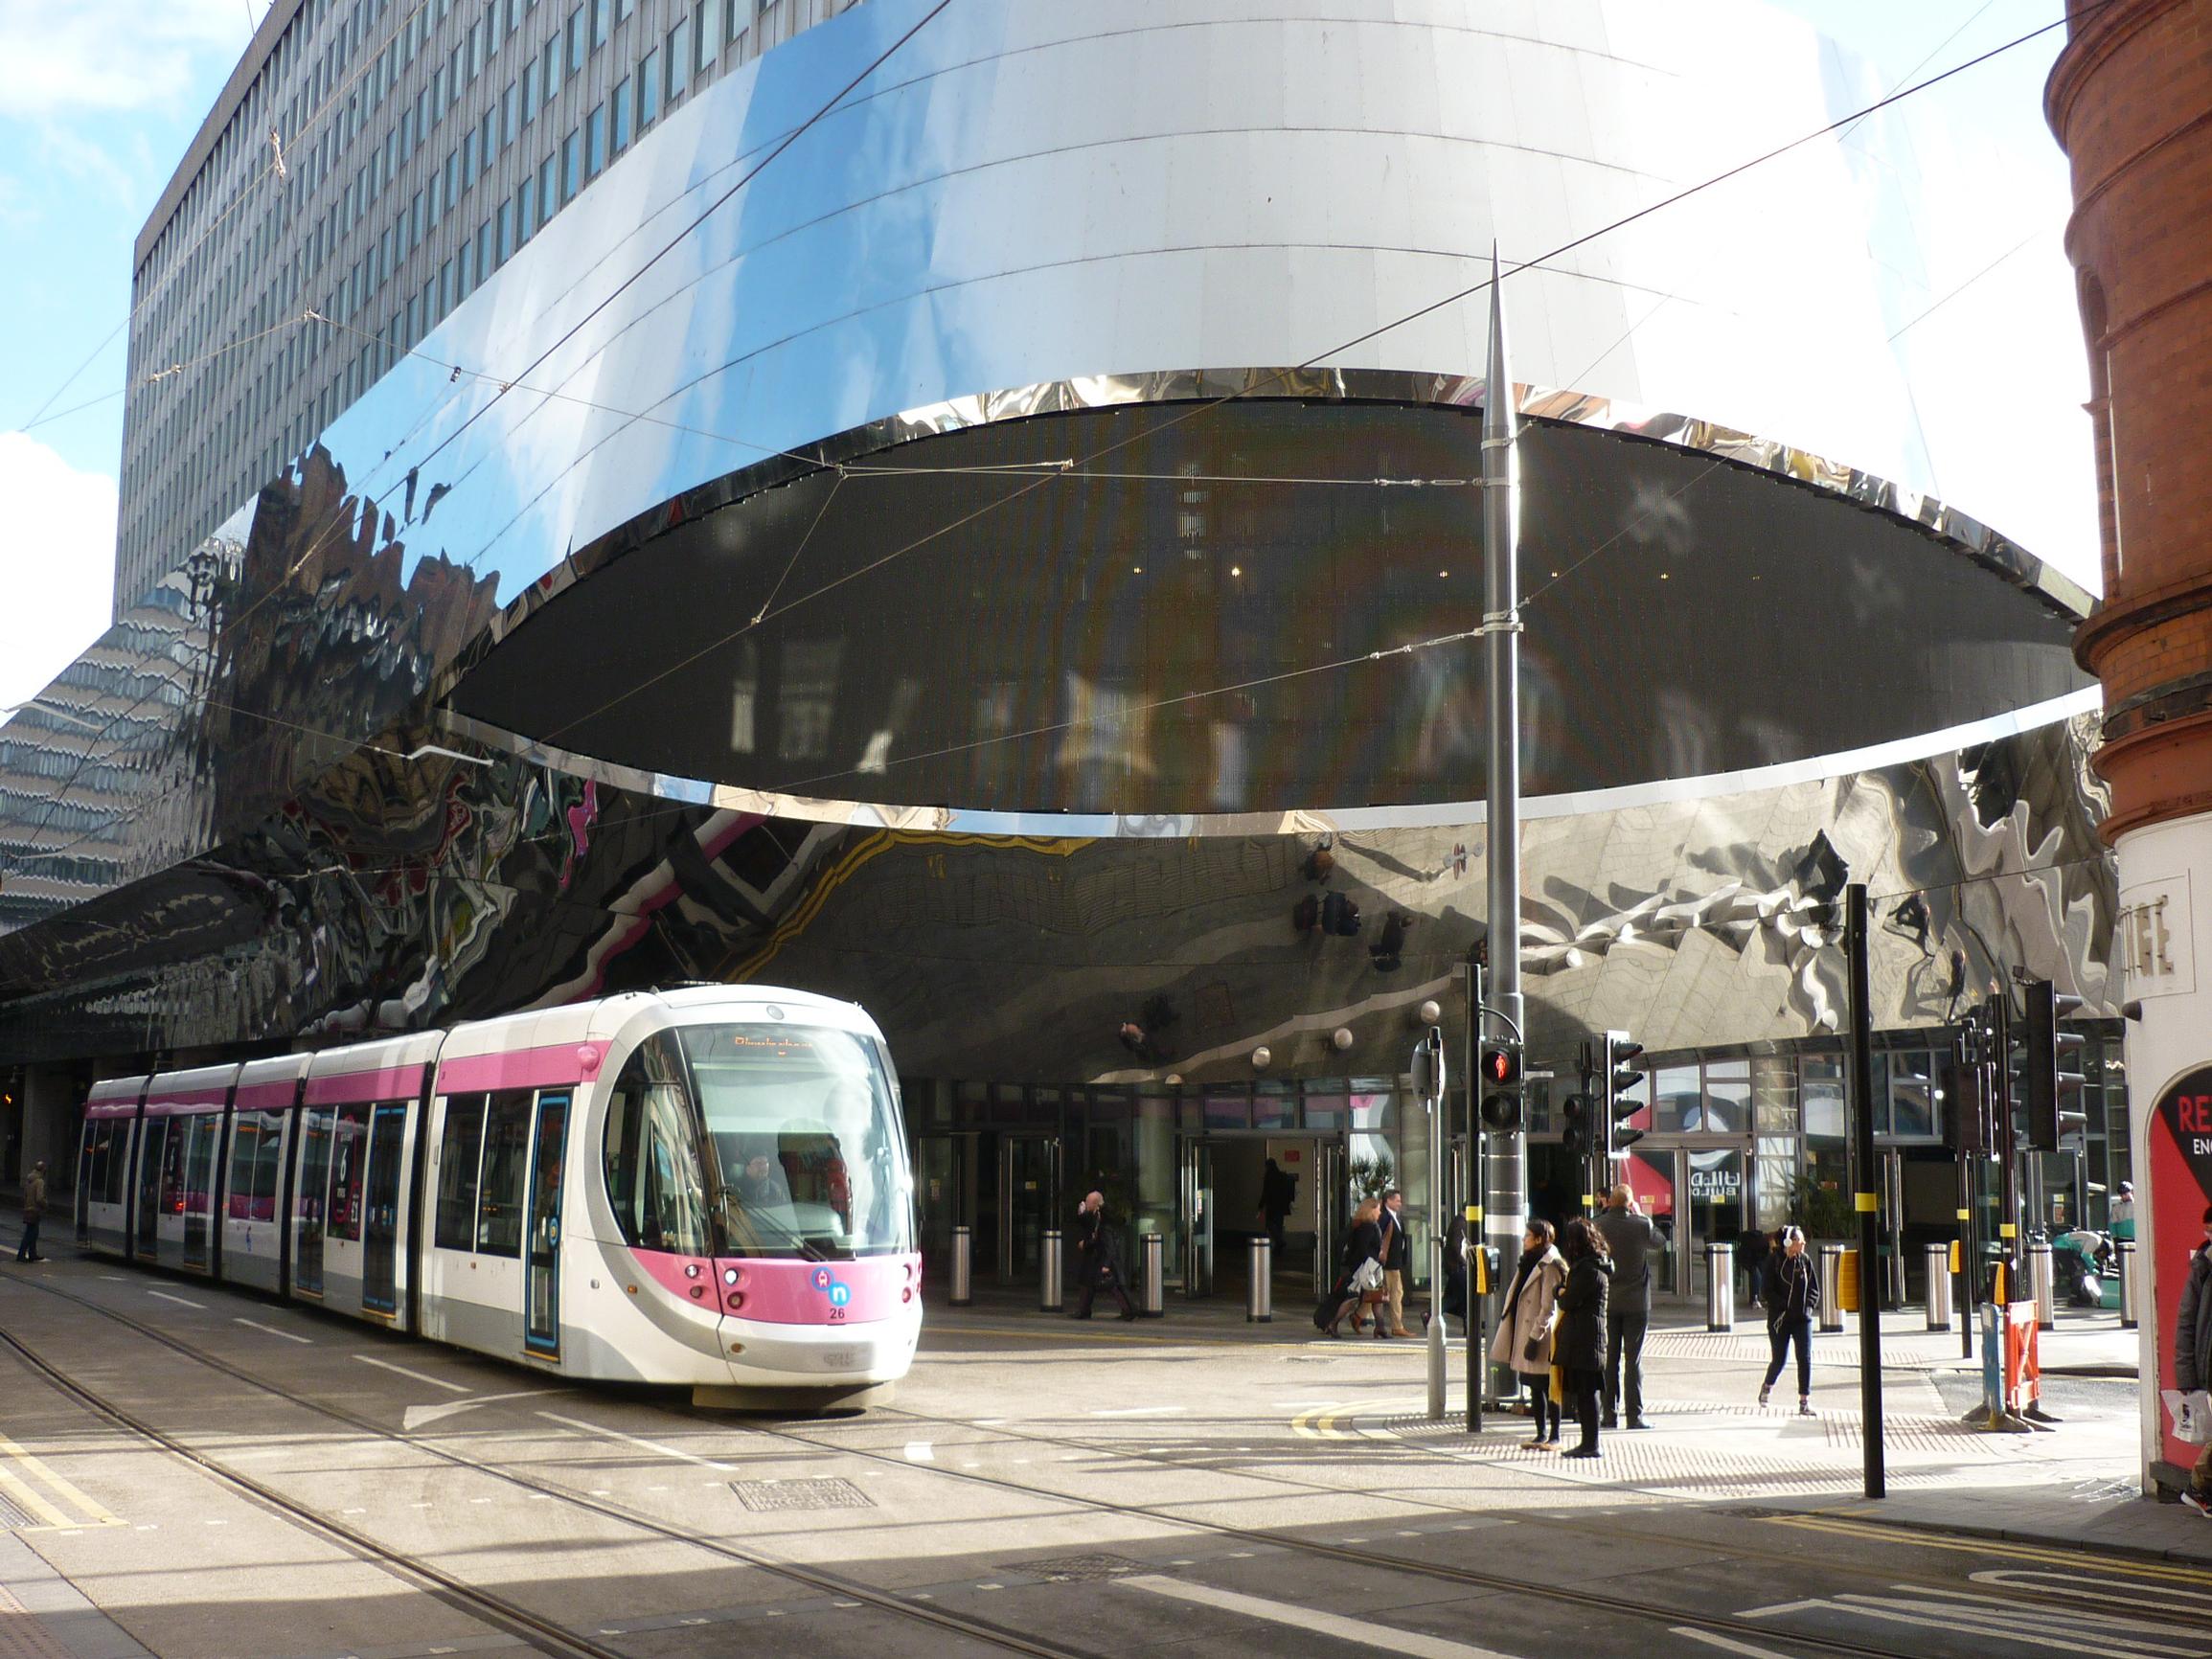 The Midland Metro tram outside the recently redeveloped Birmingham New Street Station. Trams will be part of the MaaS offering being developed by MaaS Global and Transport for West Midlands